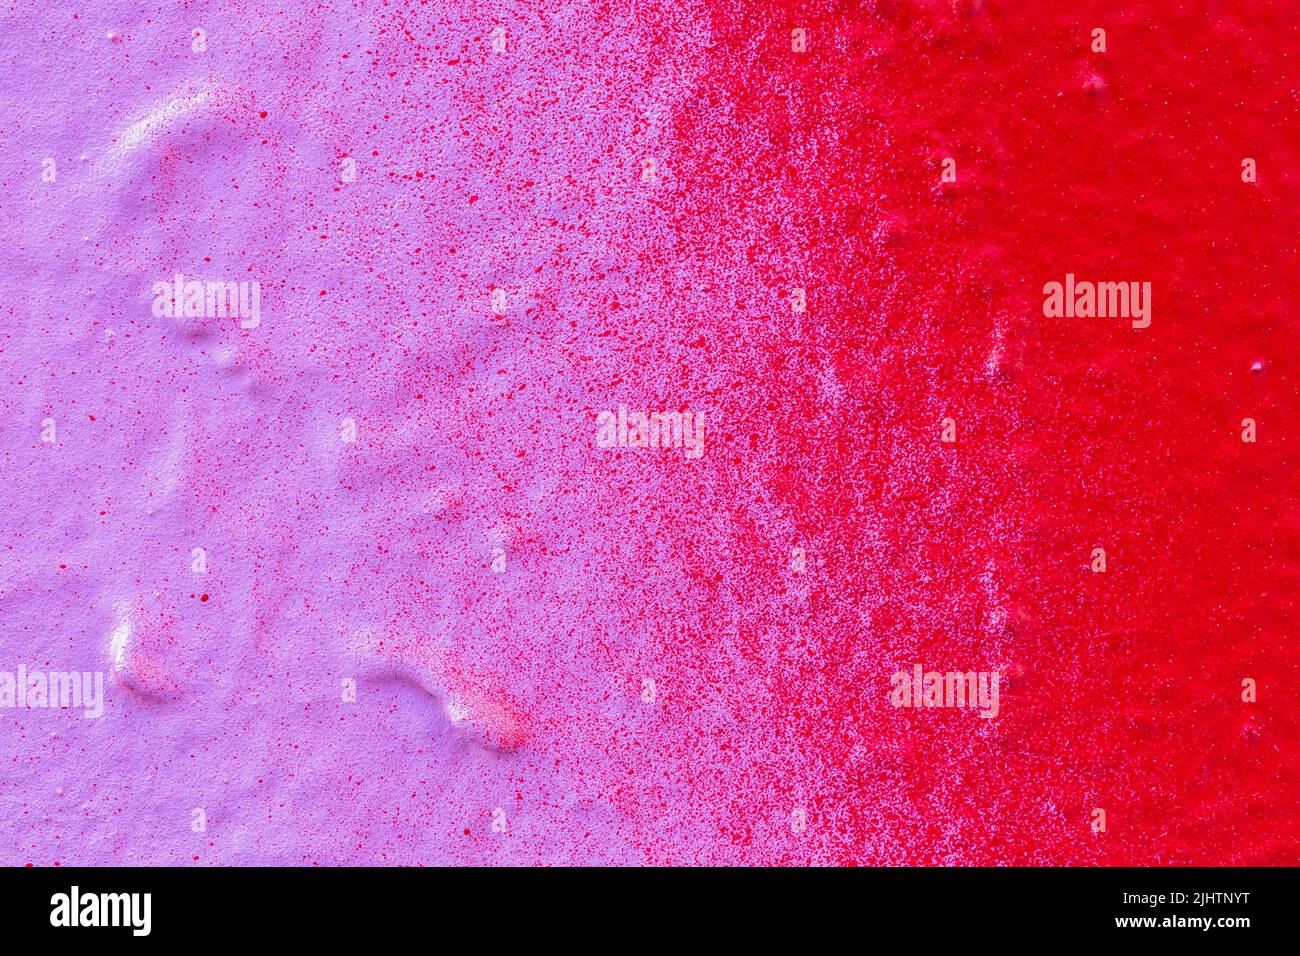 Macro close-up of a spray painted pink and red wall with splashes. Abstract full frame textured splattered graffiti background with copy space. Stock Photo